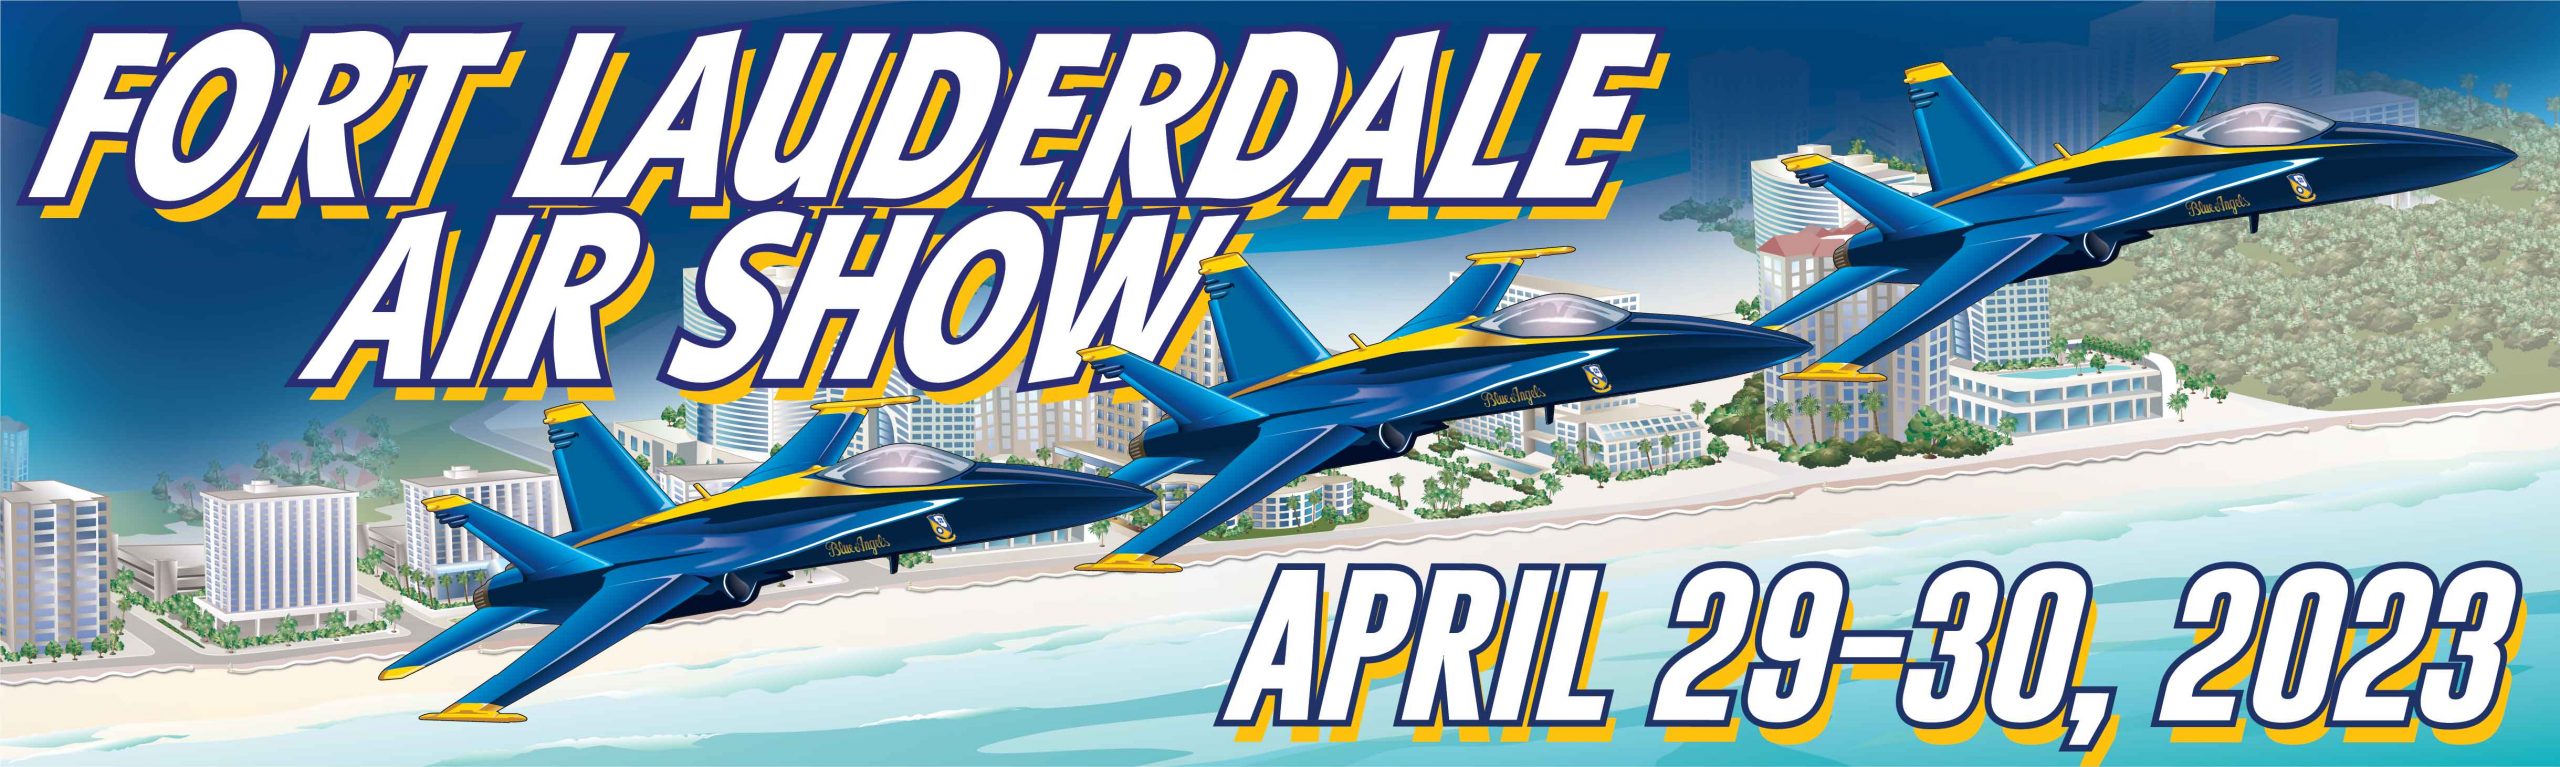 Purchase Tickets Air Dot Show • Fort Lauderdale